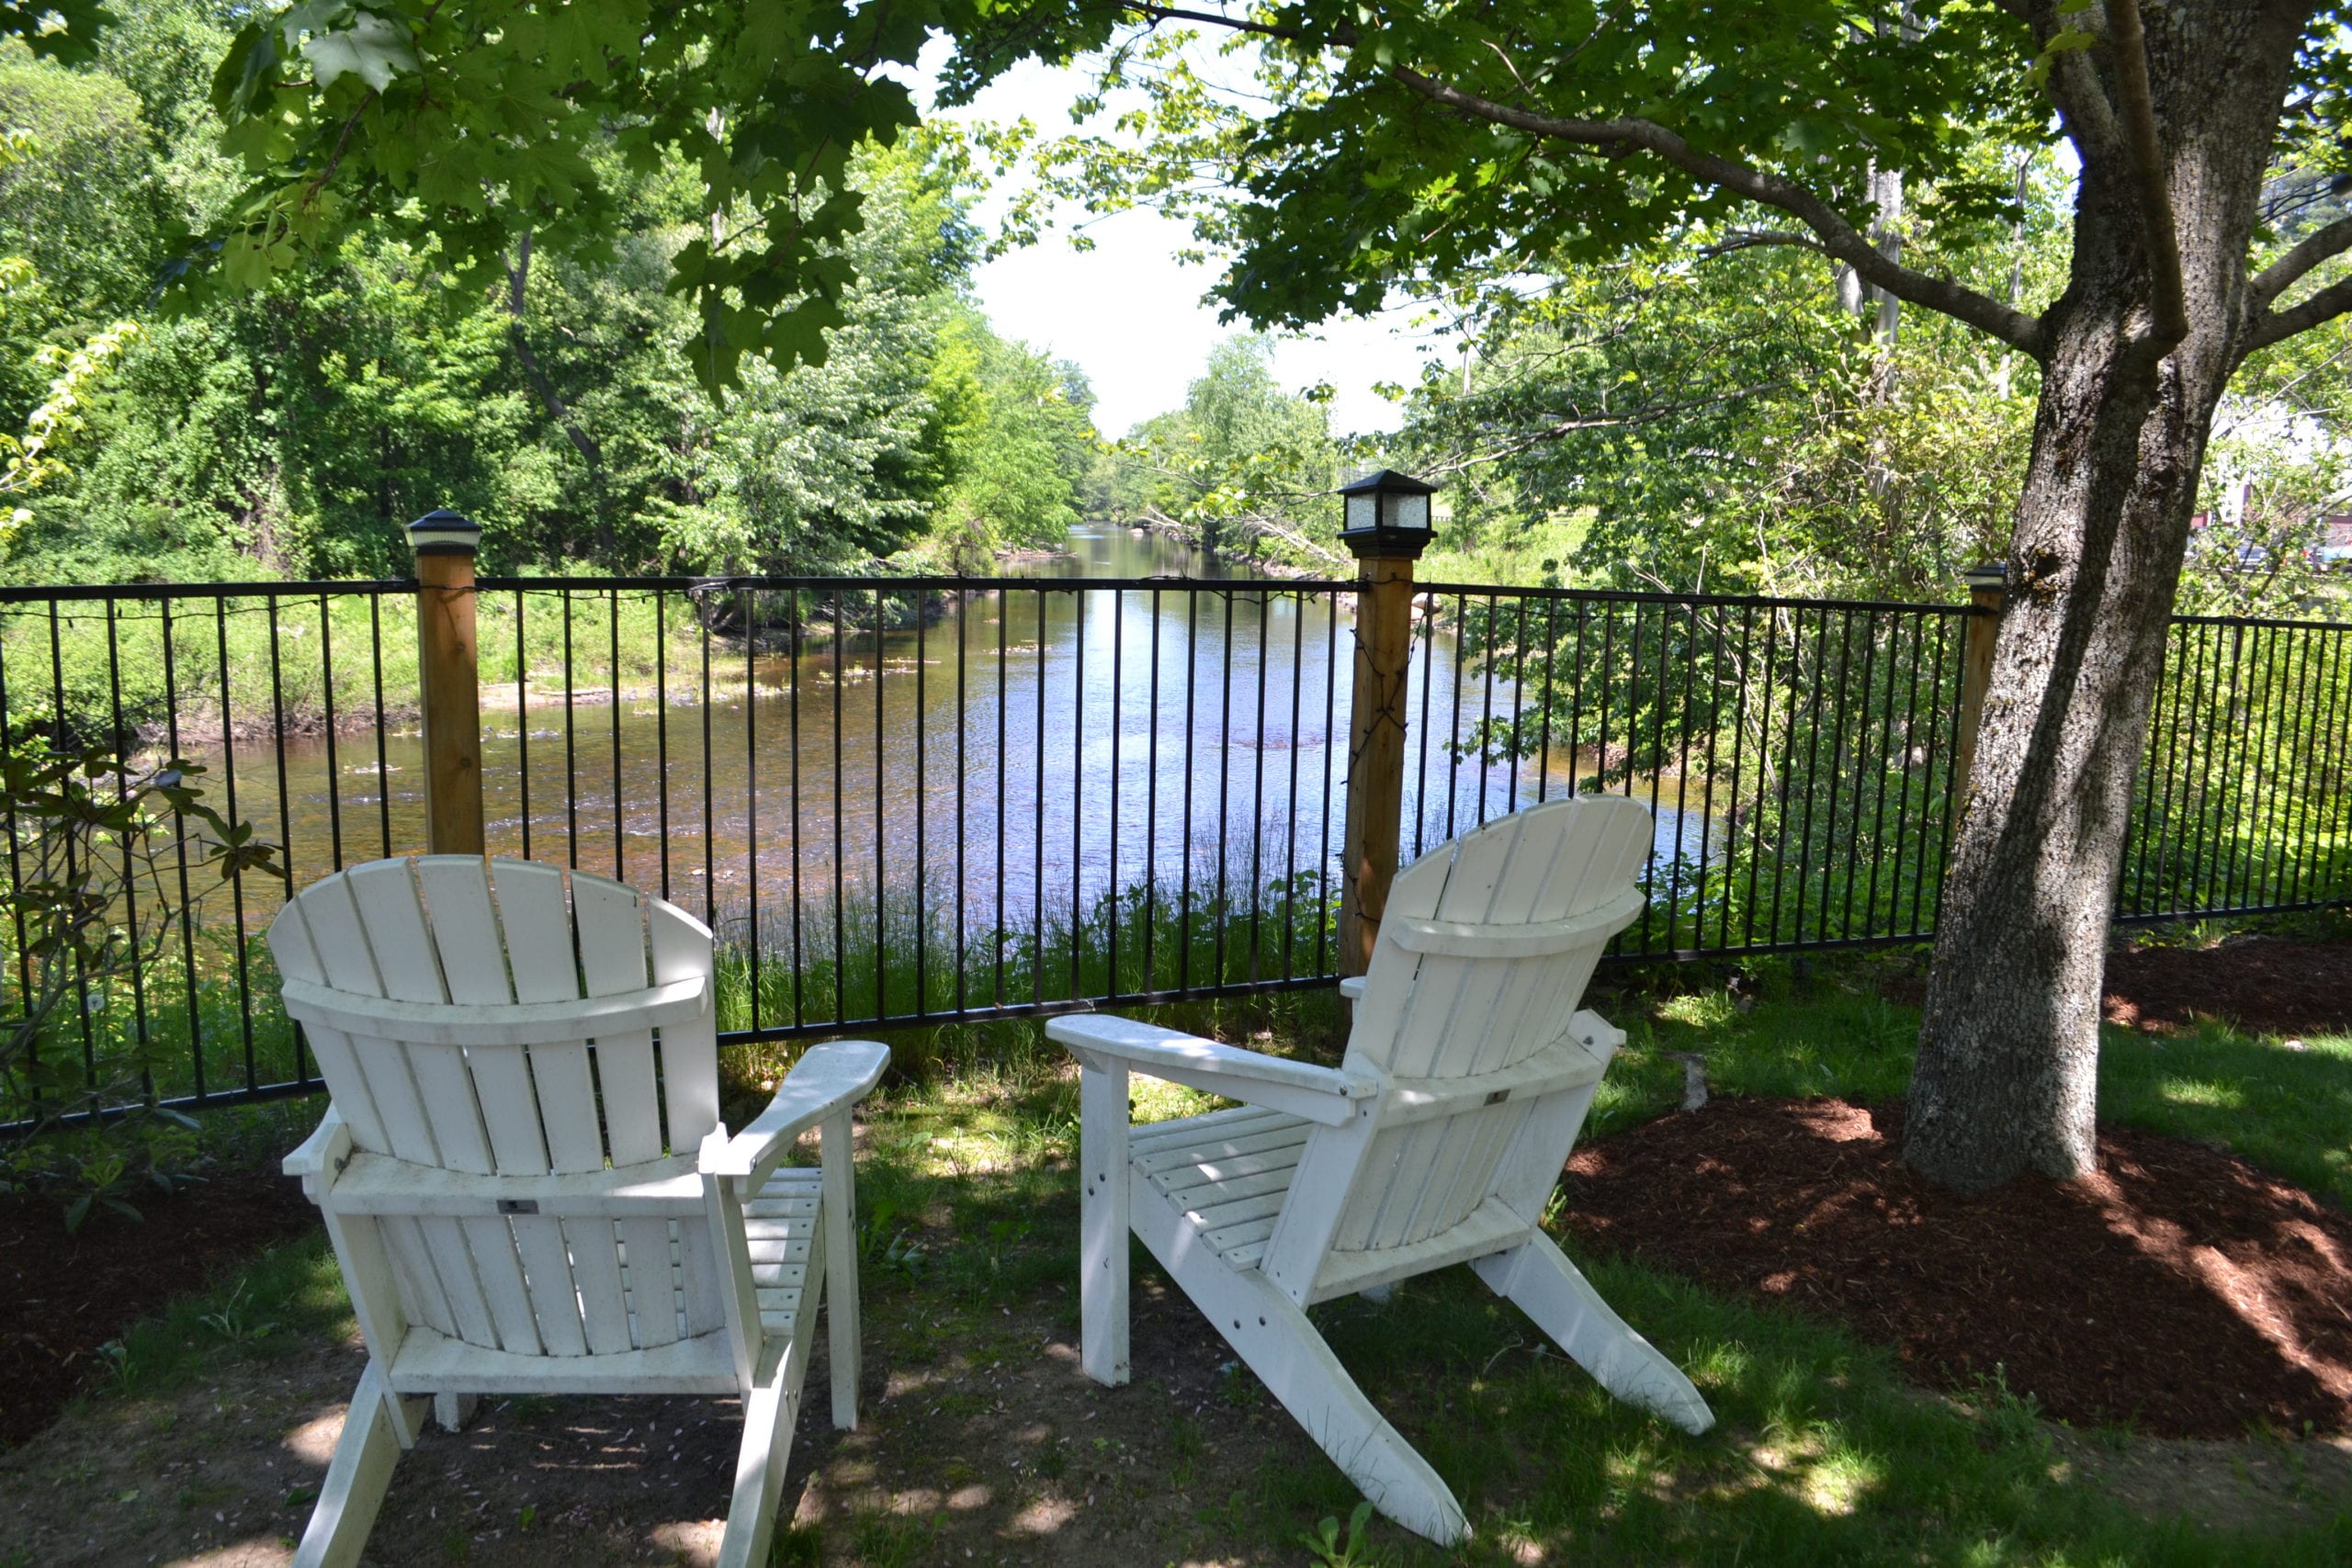 Two white adirondack chairs face the fence separating the river from the grassy area the chairs sit on